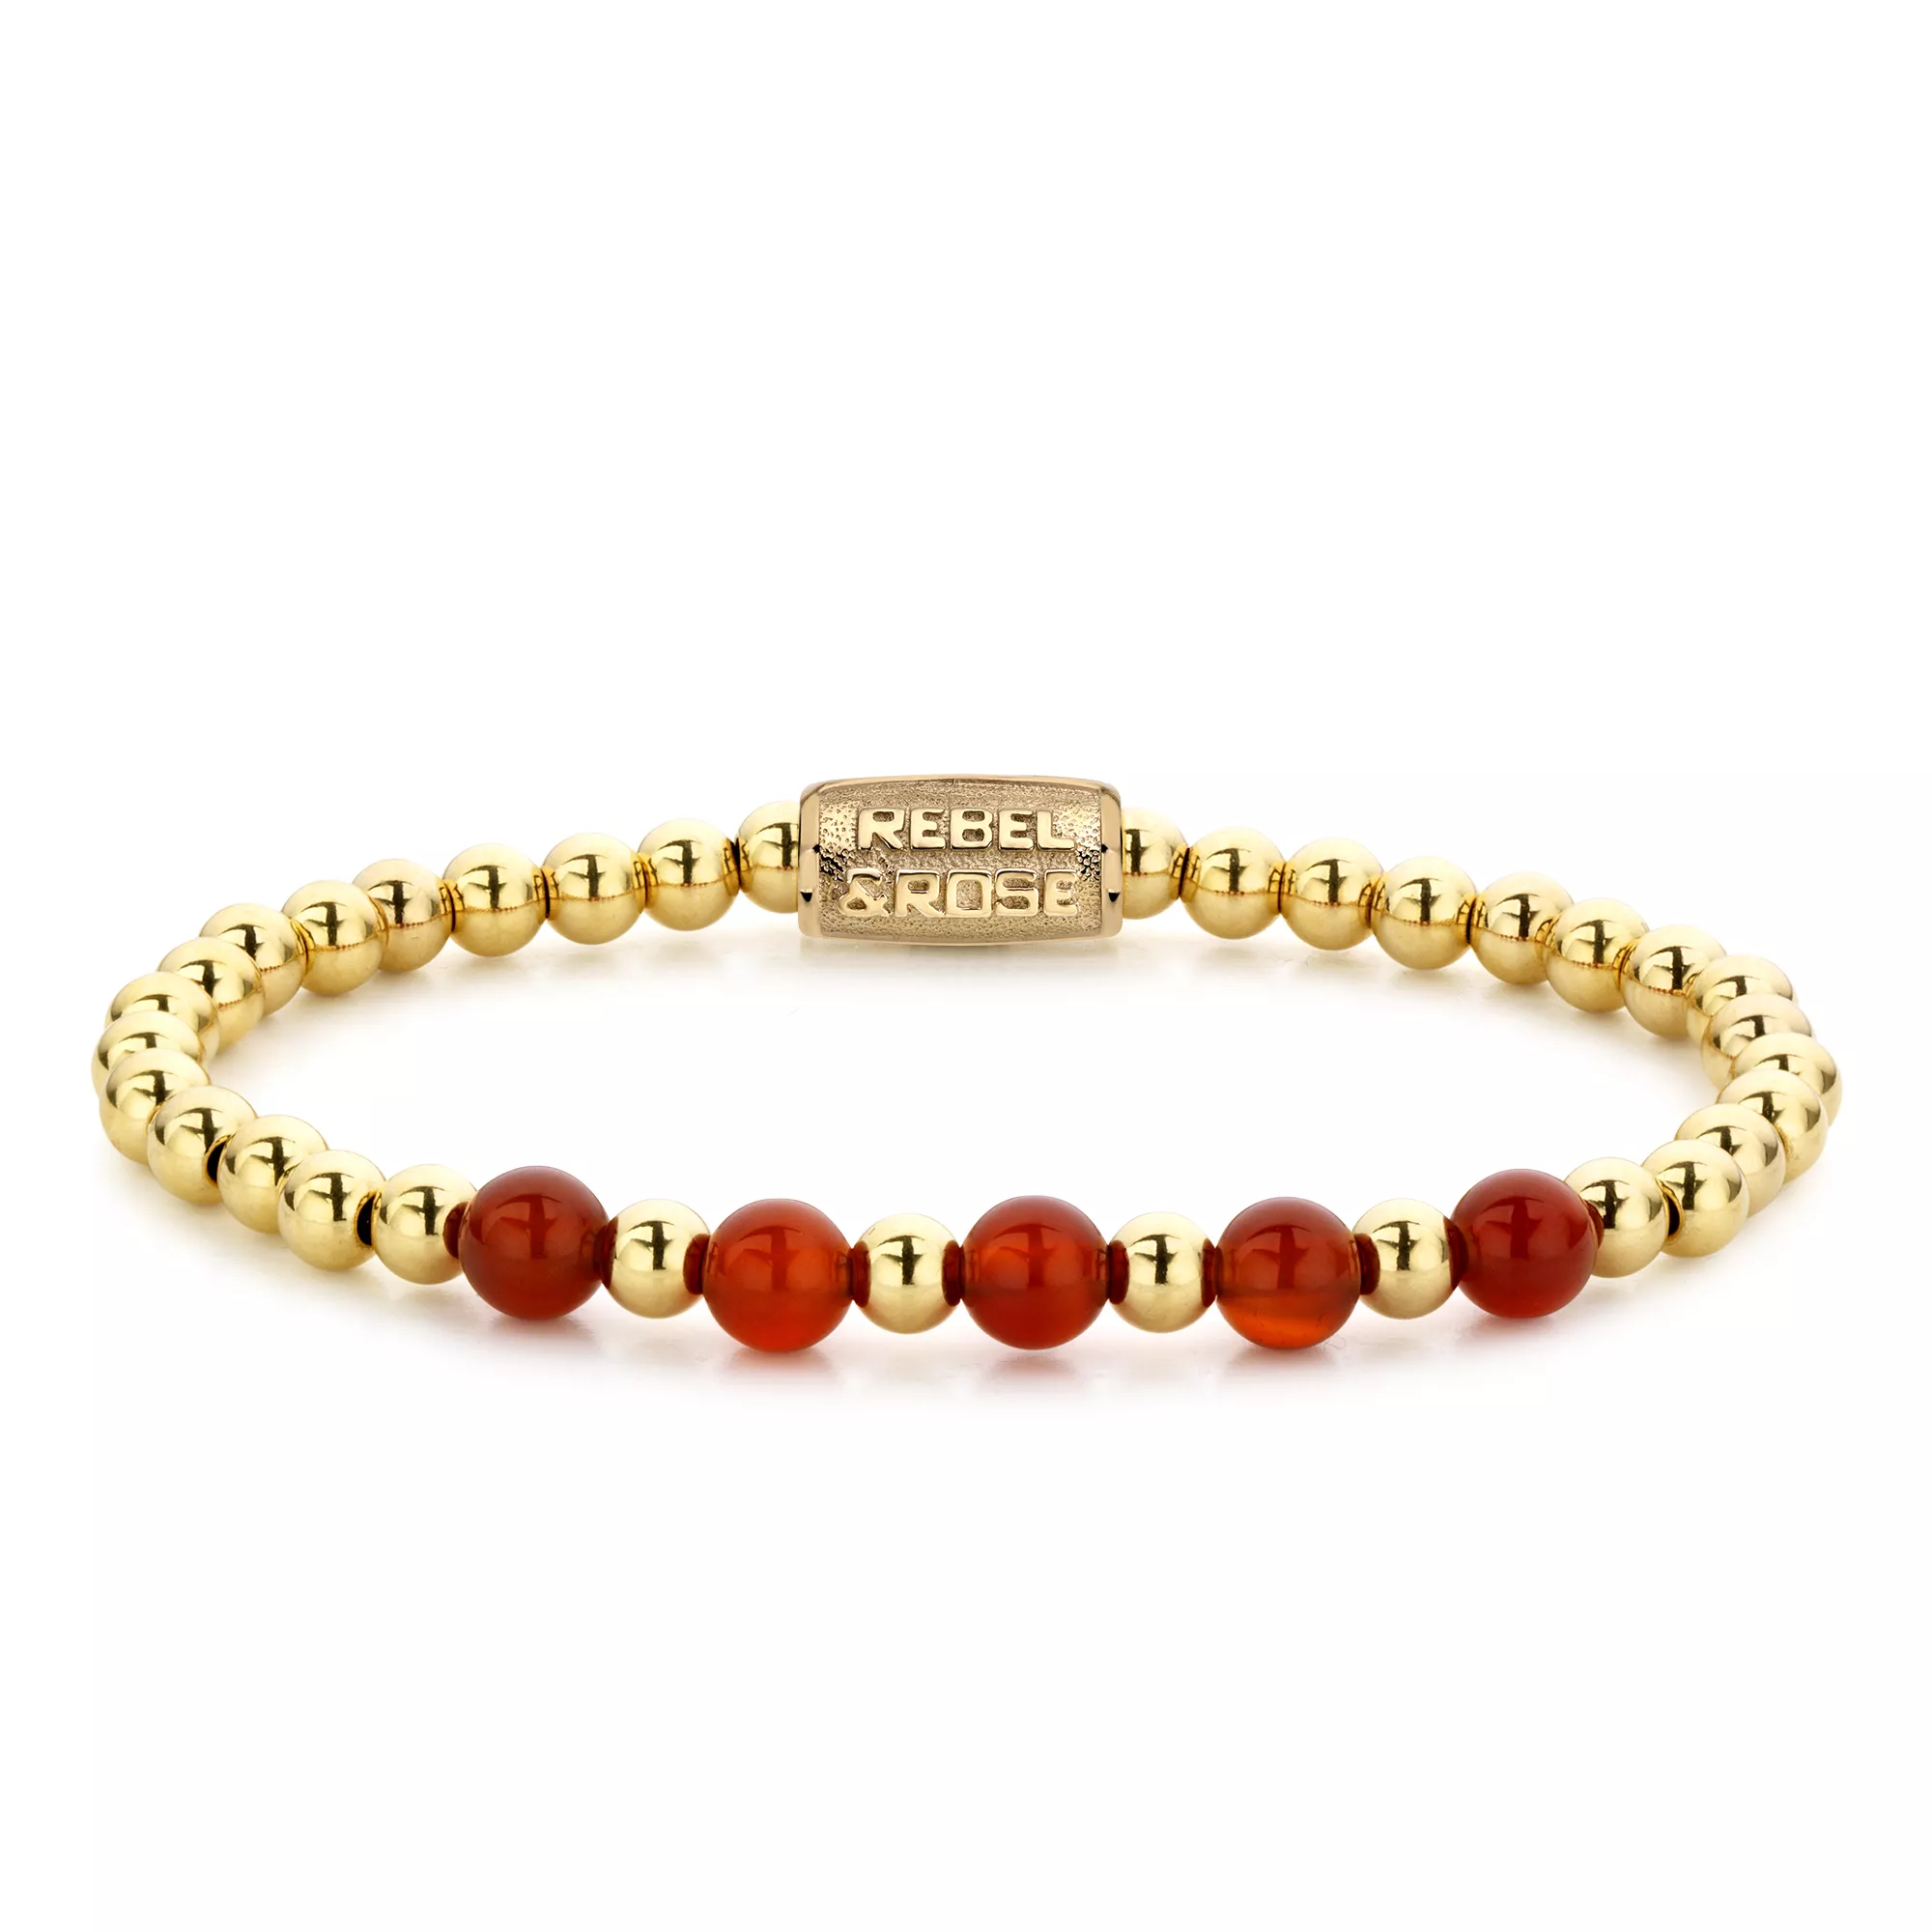 Rebel and Rose RR-60064-G Rekarmband Beads Yellow Gold meets Amazing Grace goudkleurig-rood 6 mm